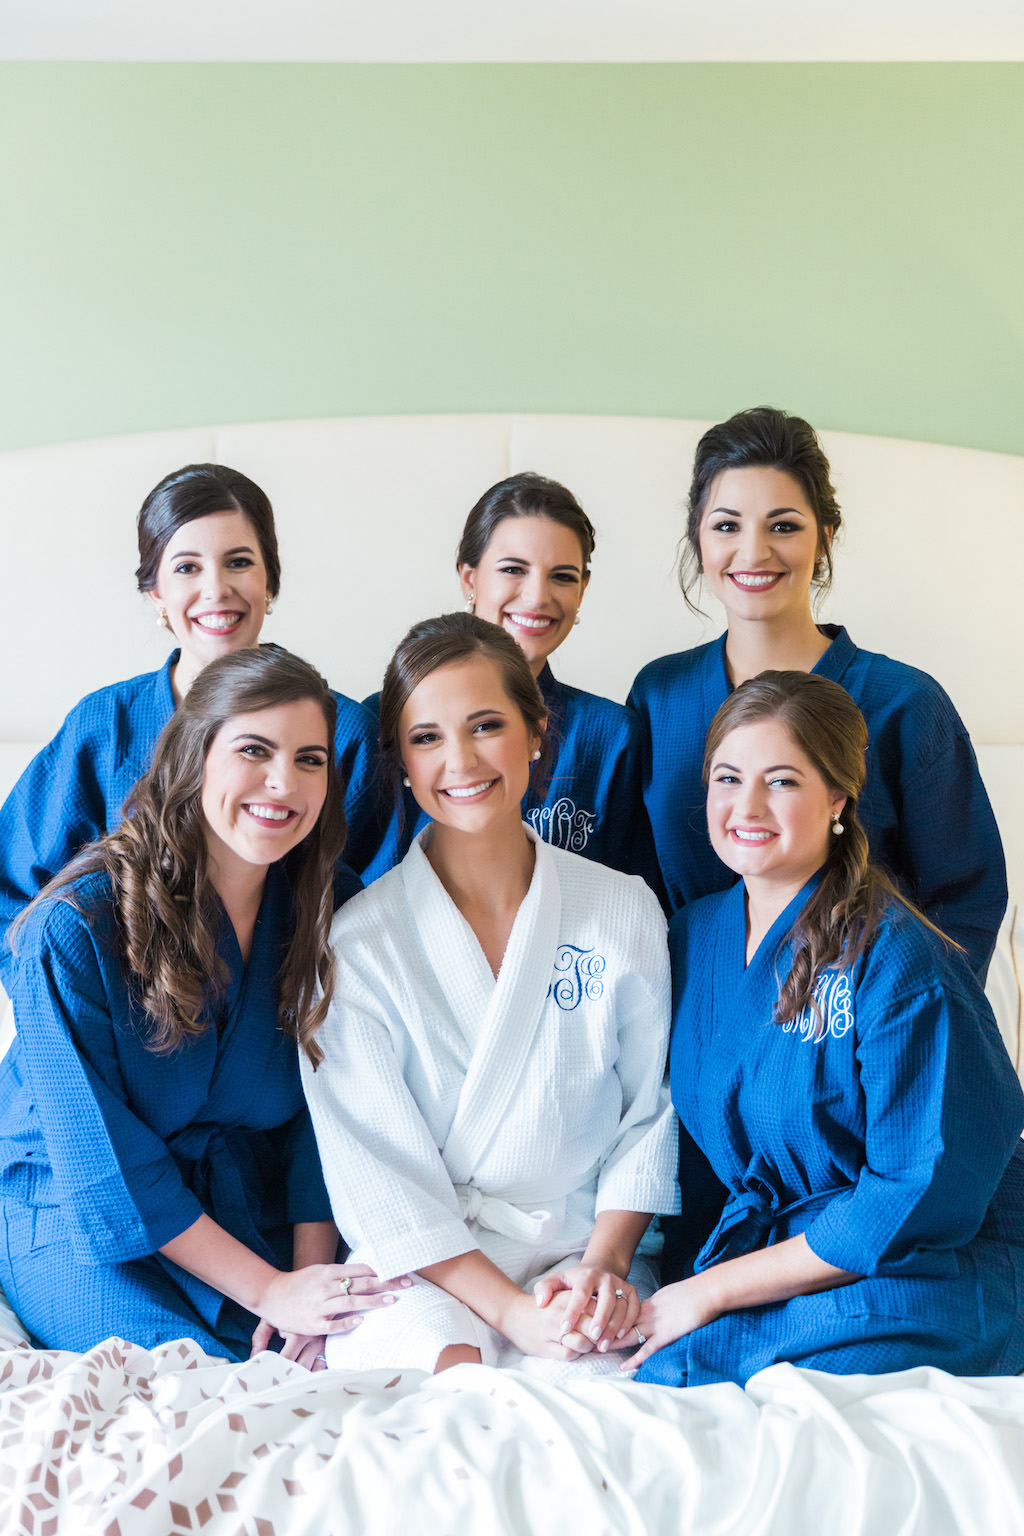 Bridal Party Getting Ready Portrait in Blue and White Monogrammed Robes | Wedding Hair and Makeup Michele Renee The Studio